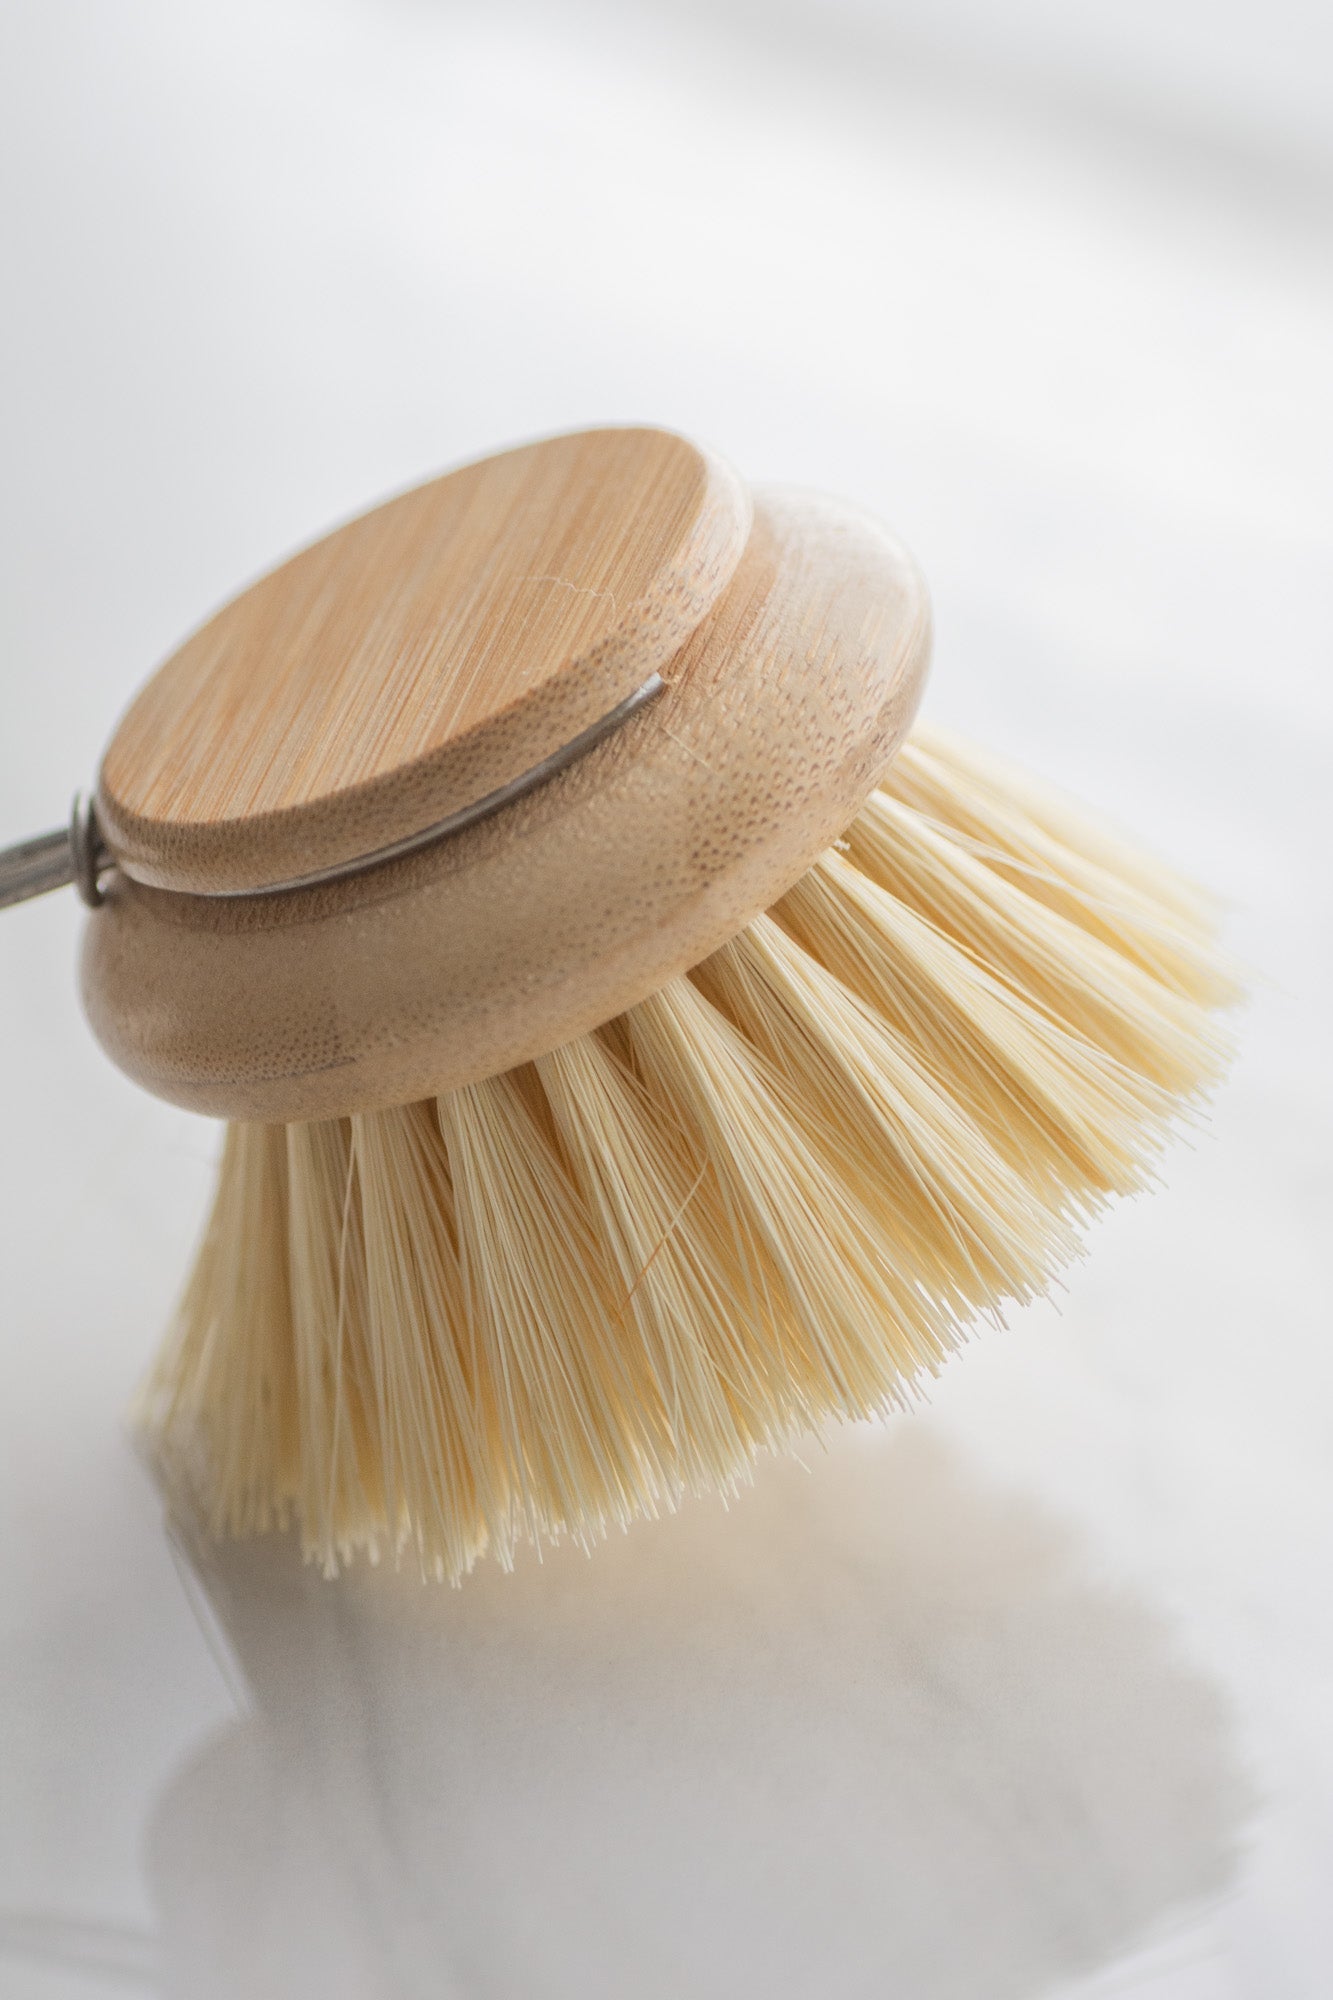 No Tox Life - Dish Brush With Replaceable Head